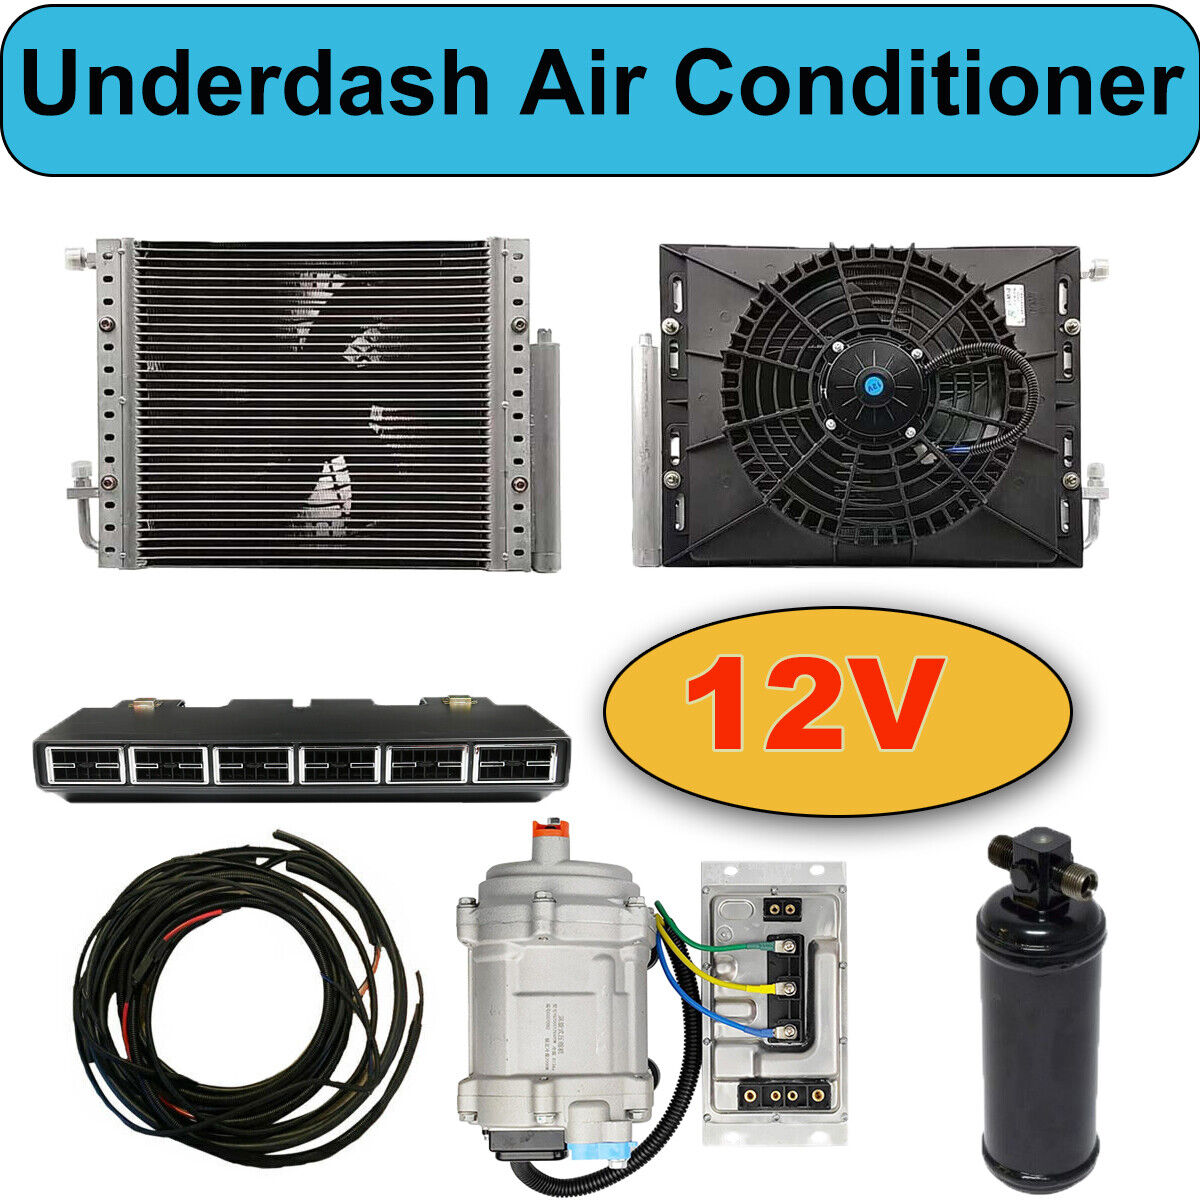 Universal Car Truck 12V Air Conditioning Cooling Underdash A/C Compressor Kit